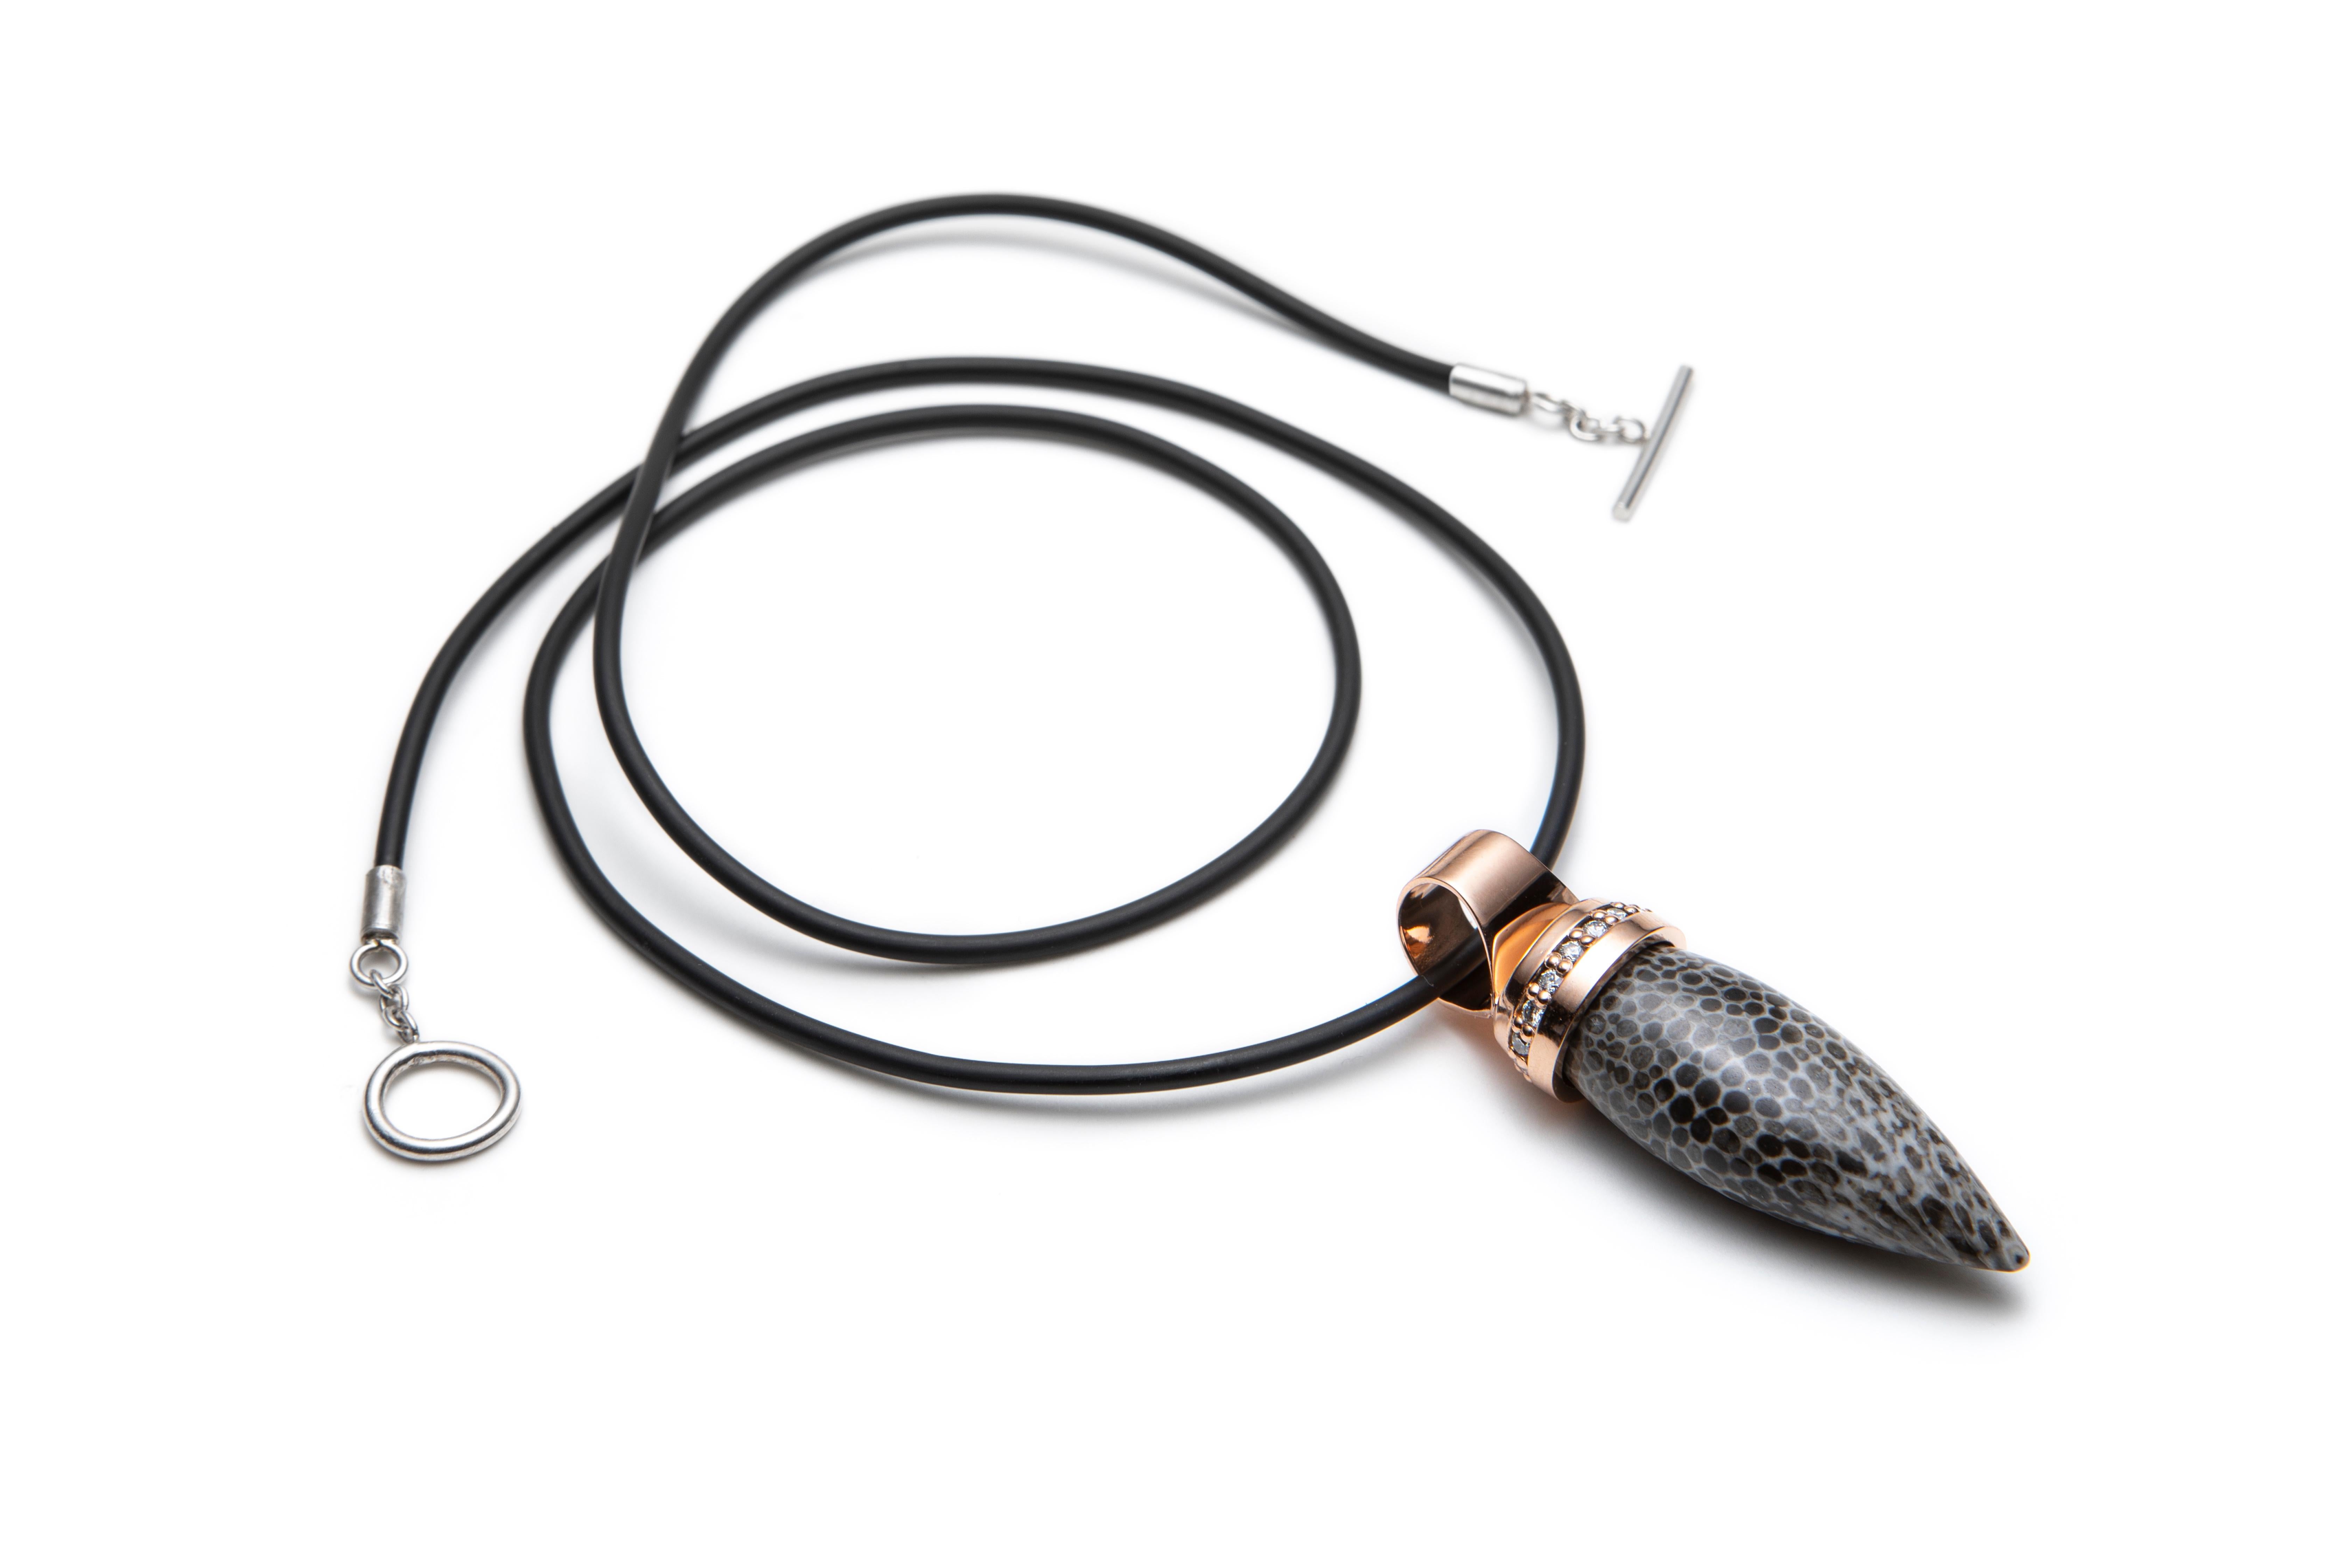 JURASSICA Pendant in 18K Rose Gold set with Fossil Agate and Diamonds

This pendant features a stunning 1.3 inch fantasy cut fossilized coral agate. To add a touch of light a row of diamonds is set in the 18K rose gold mounting that holds the stone.